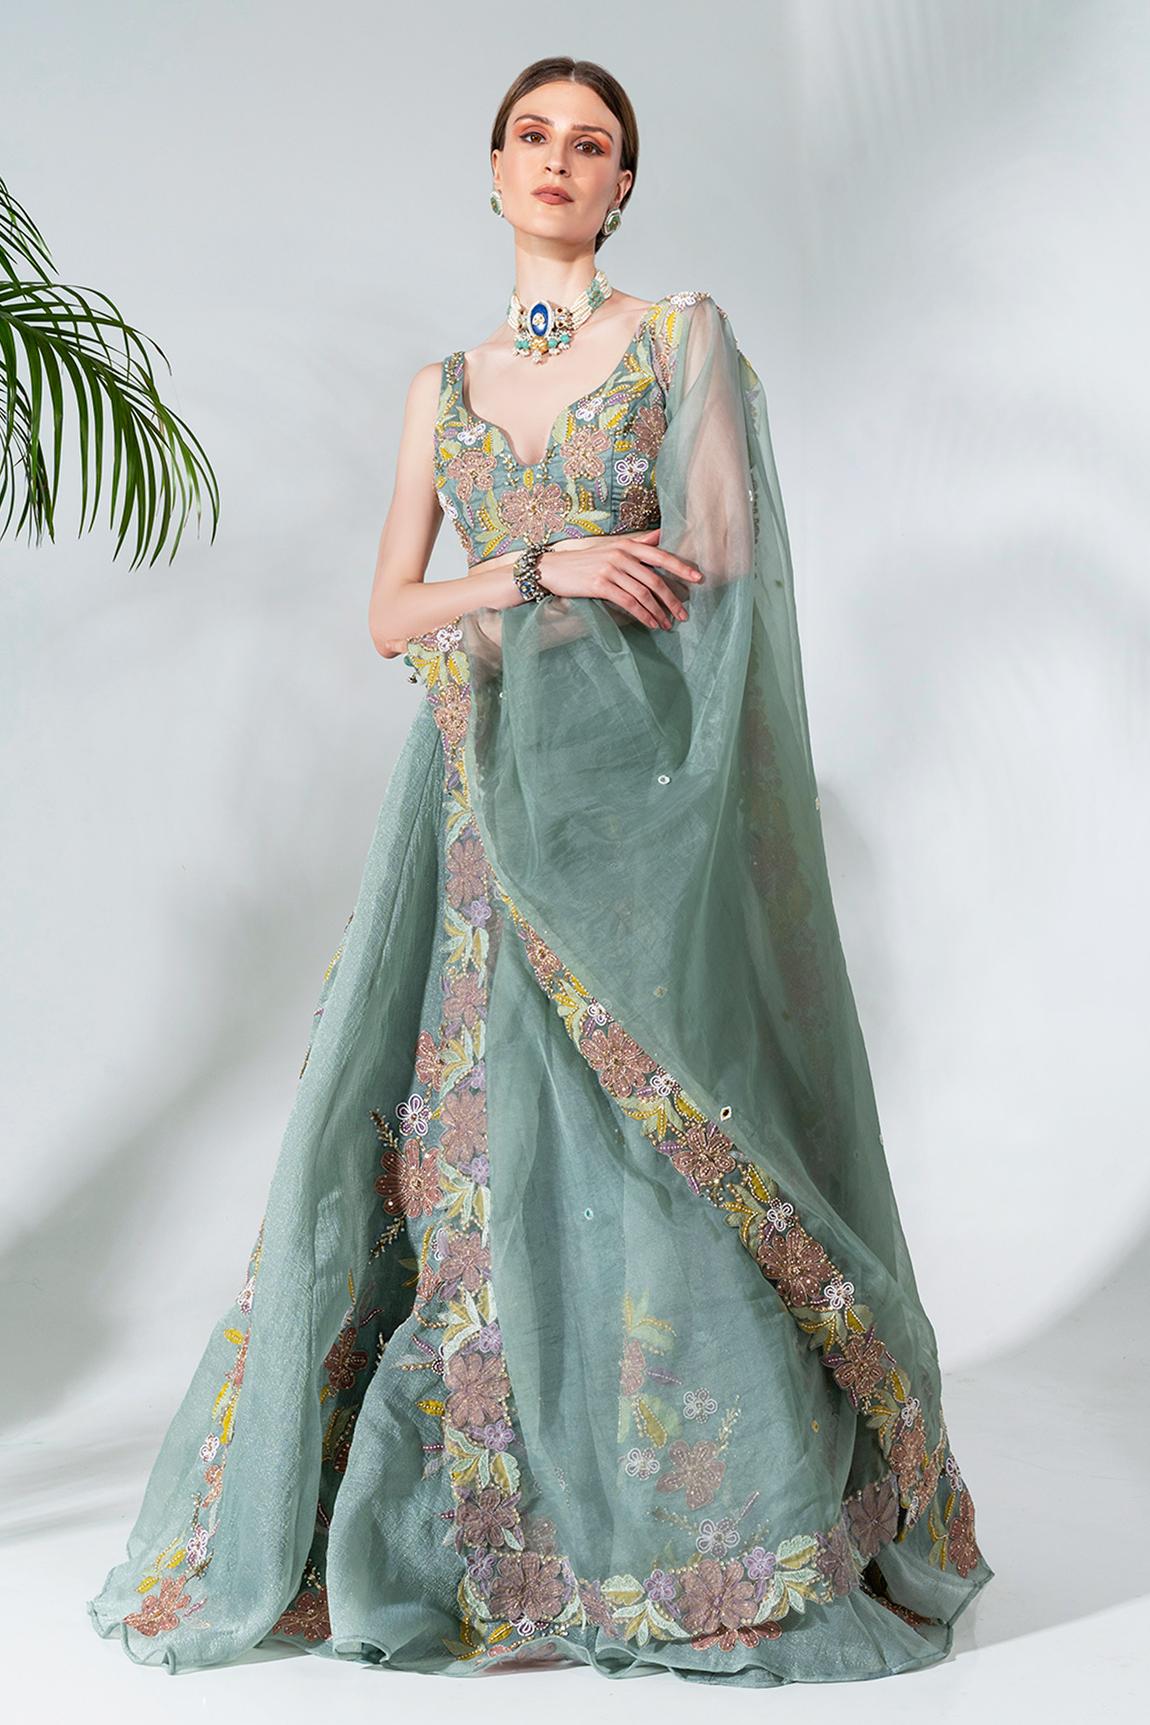 Dusty green  lehenga featuring floral applique patterns